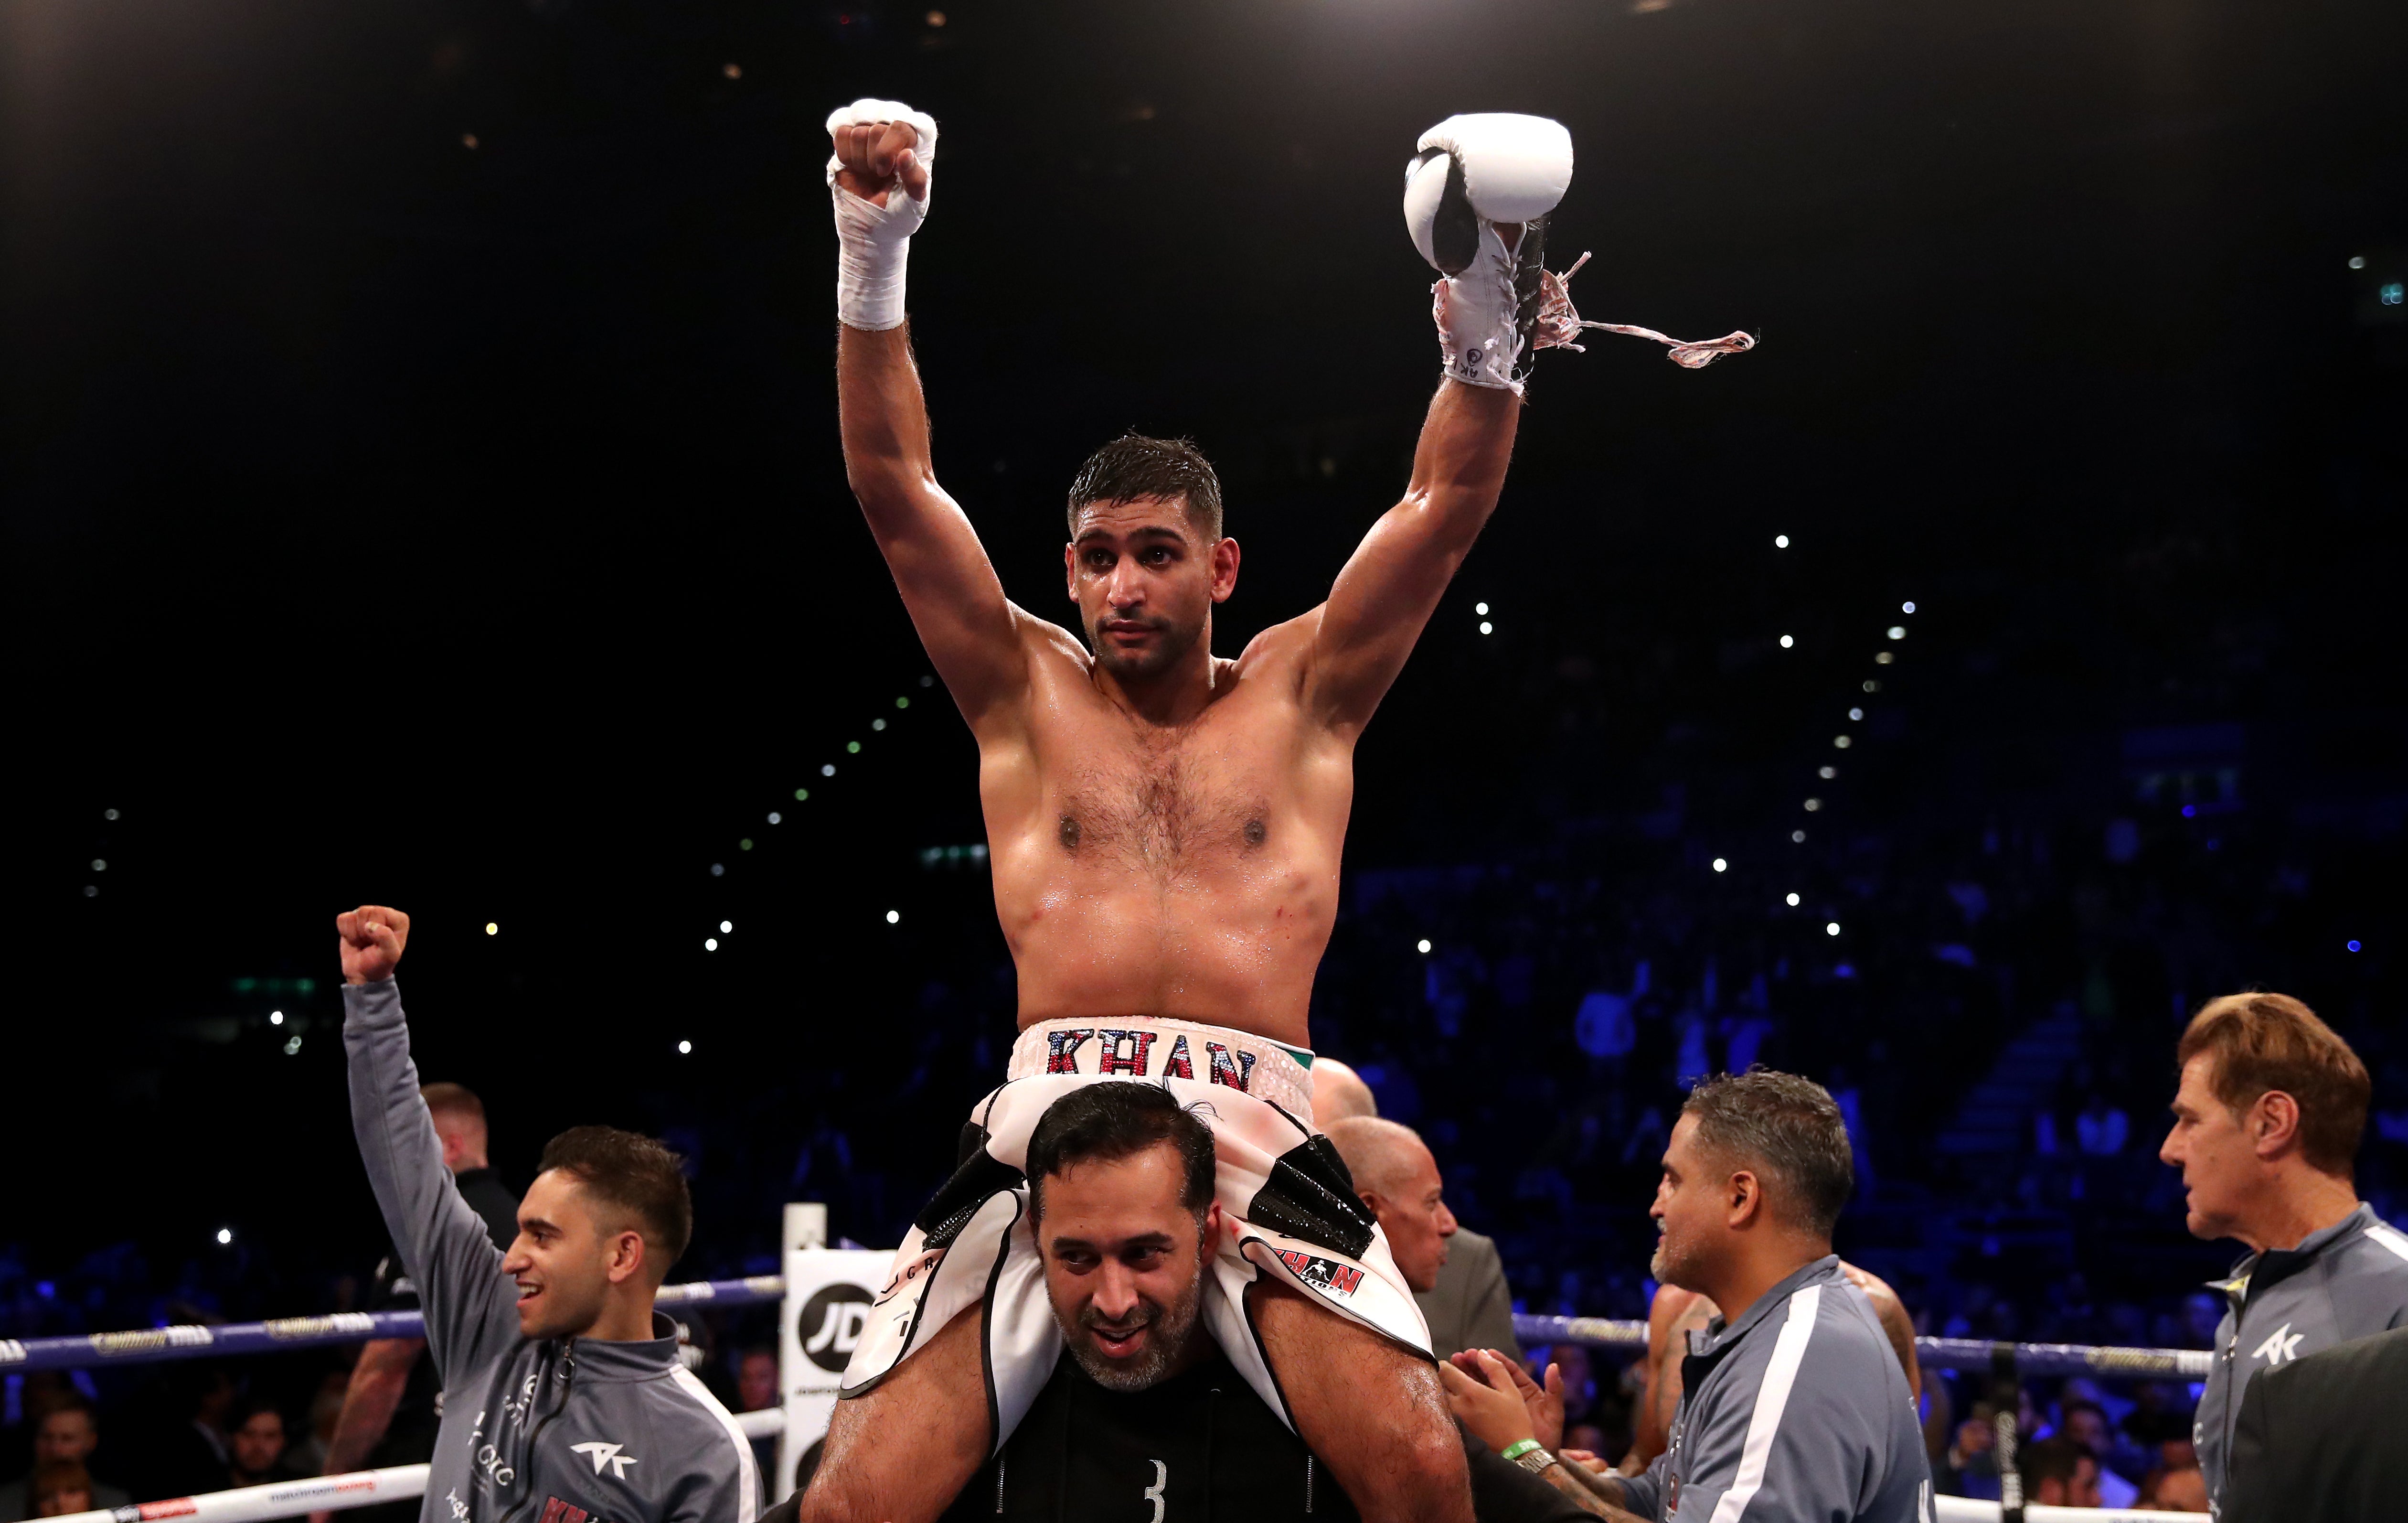 Khan told the court he had been put into tough situations in the ring but the robbery was ‘very scary’